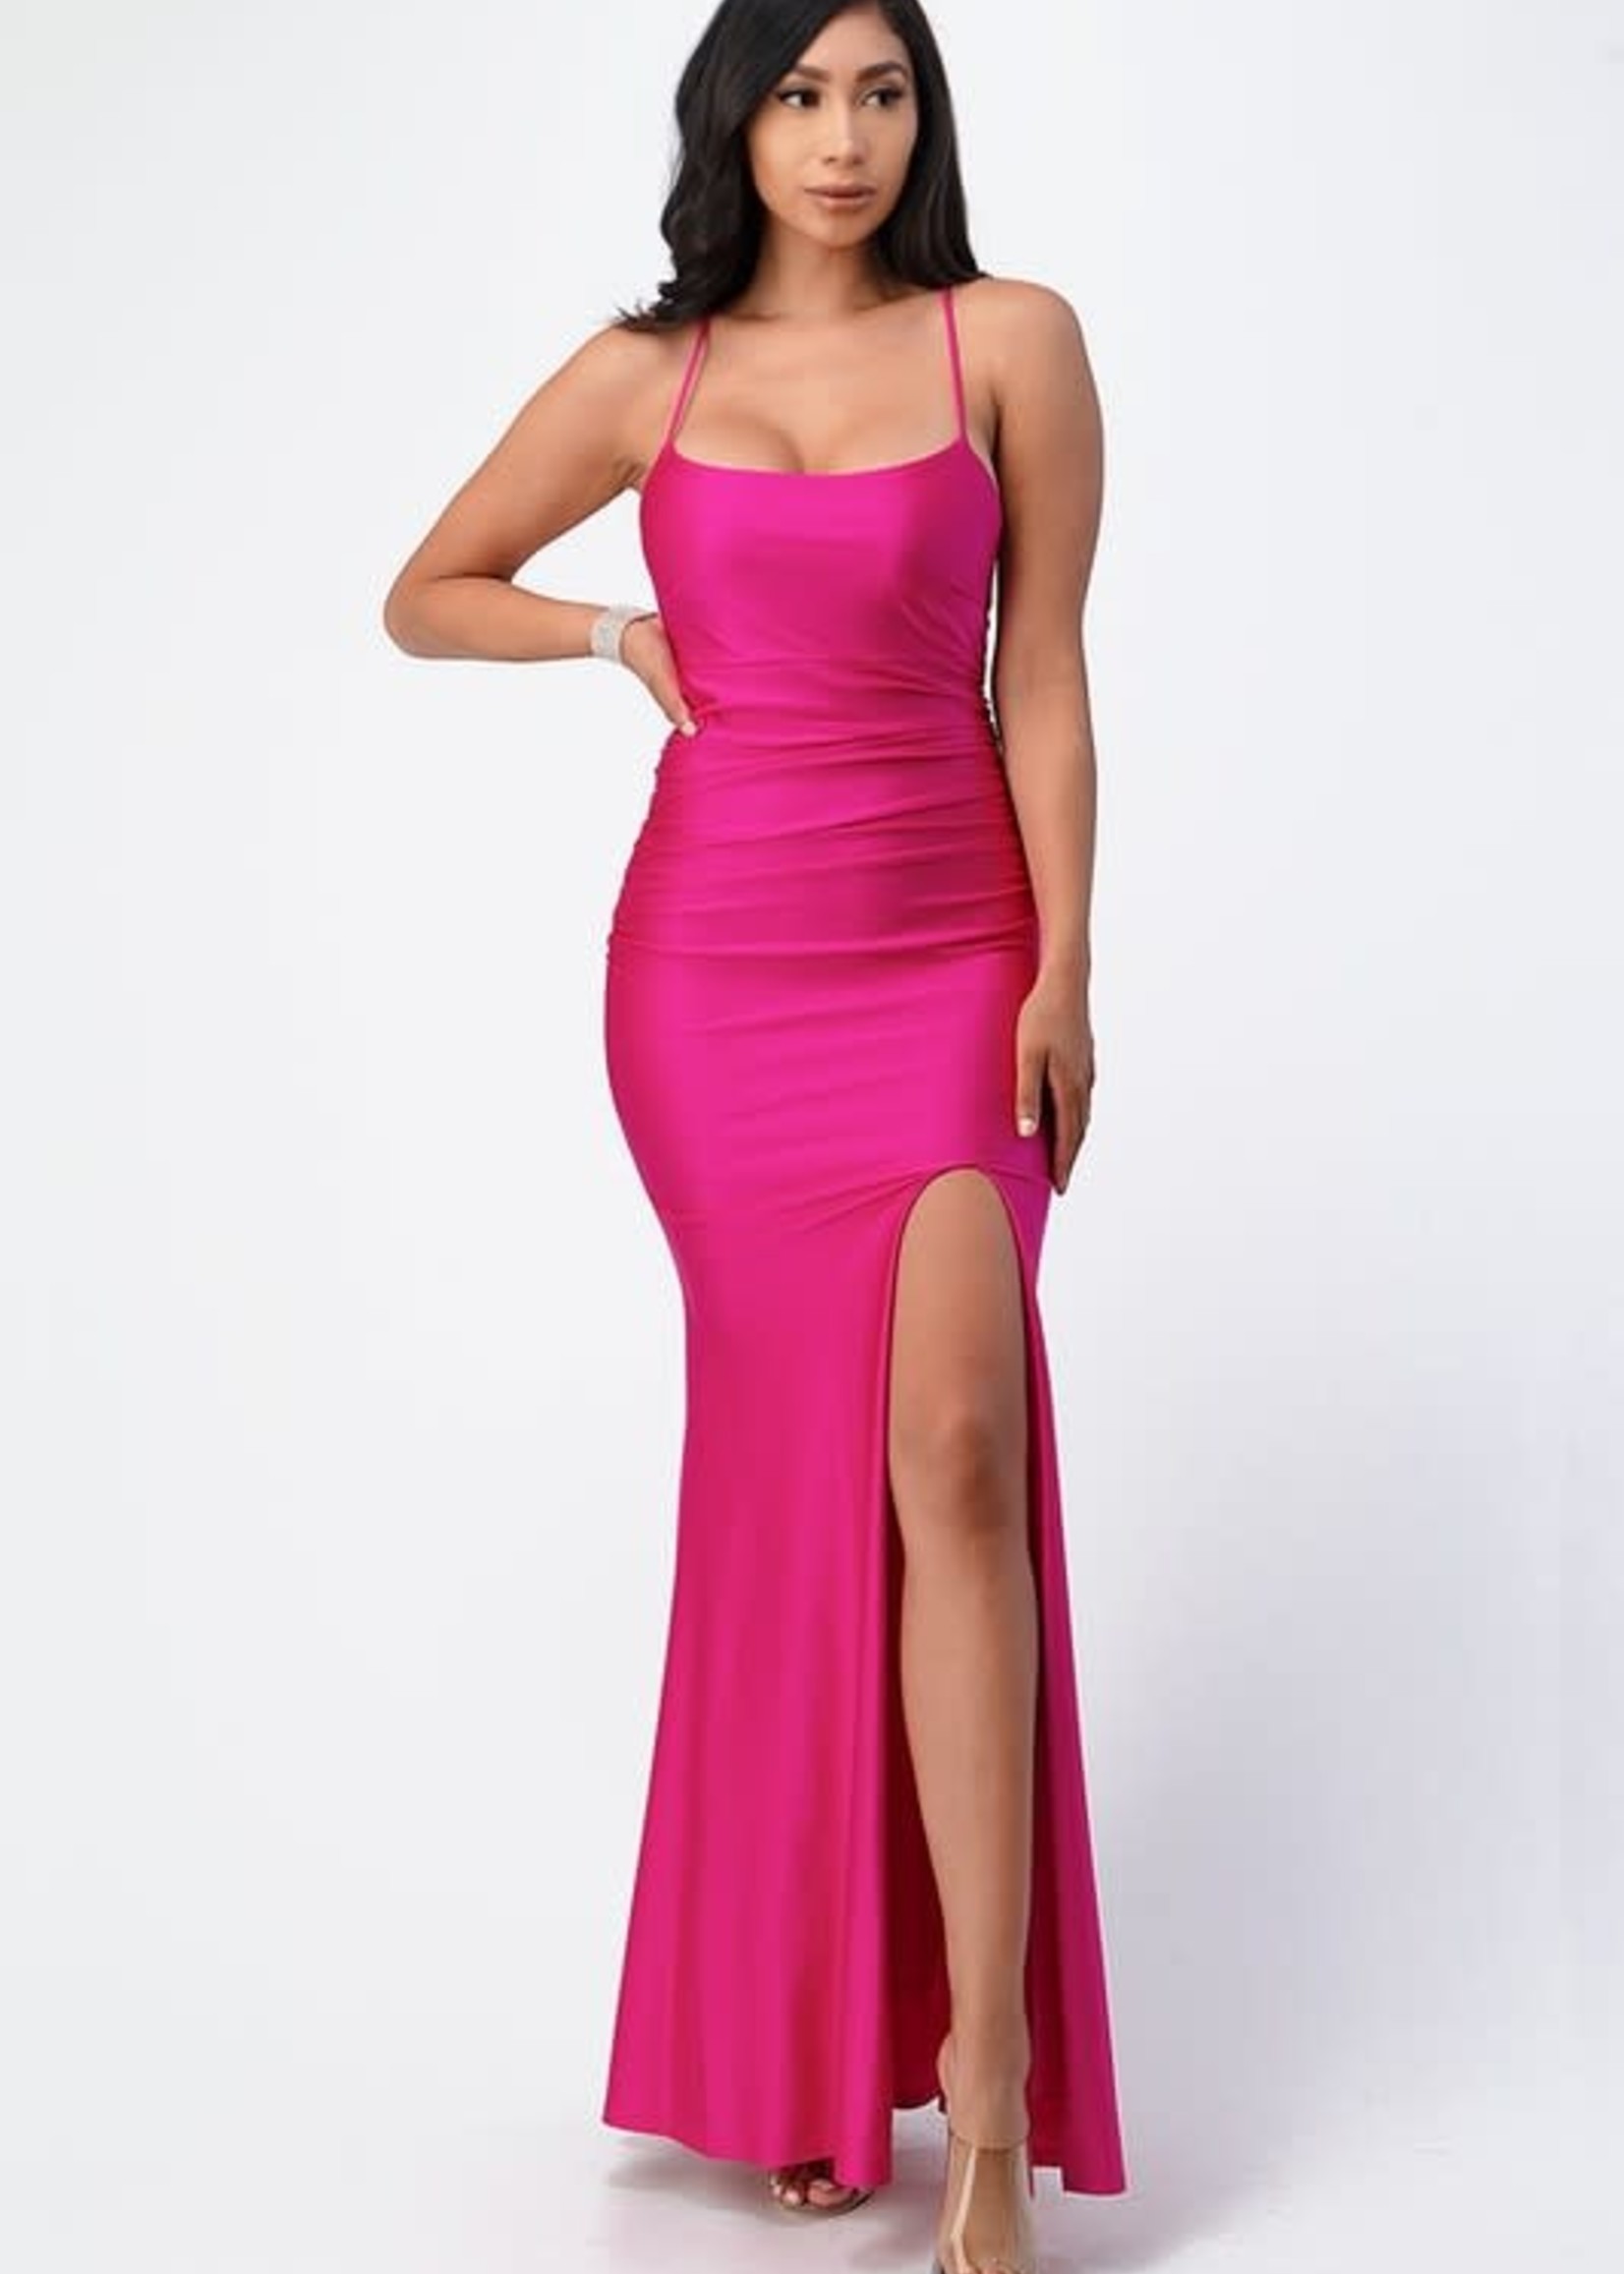 Only For You Formal Dress (10 Colors)